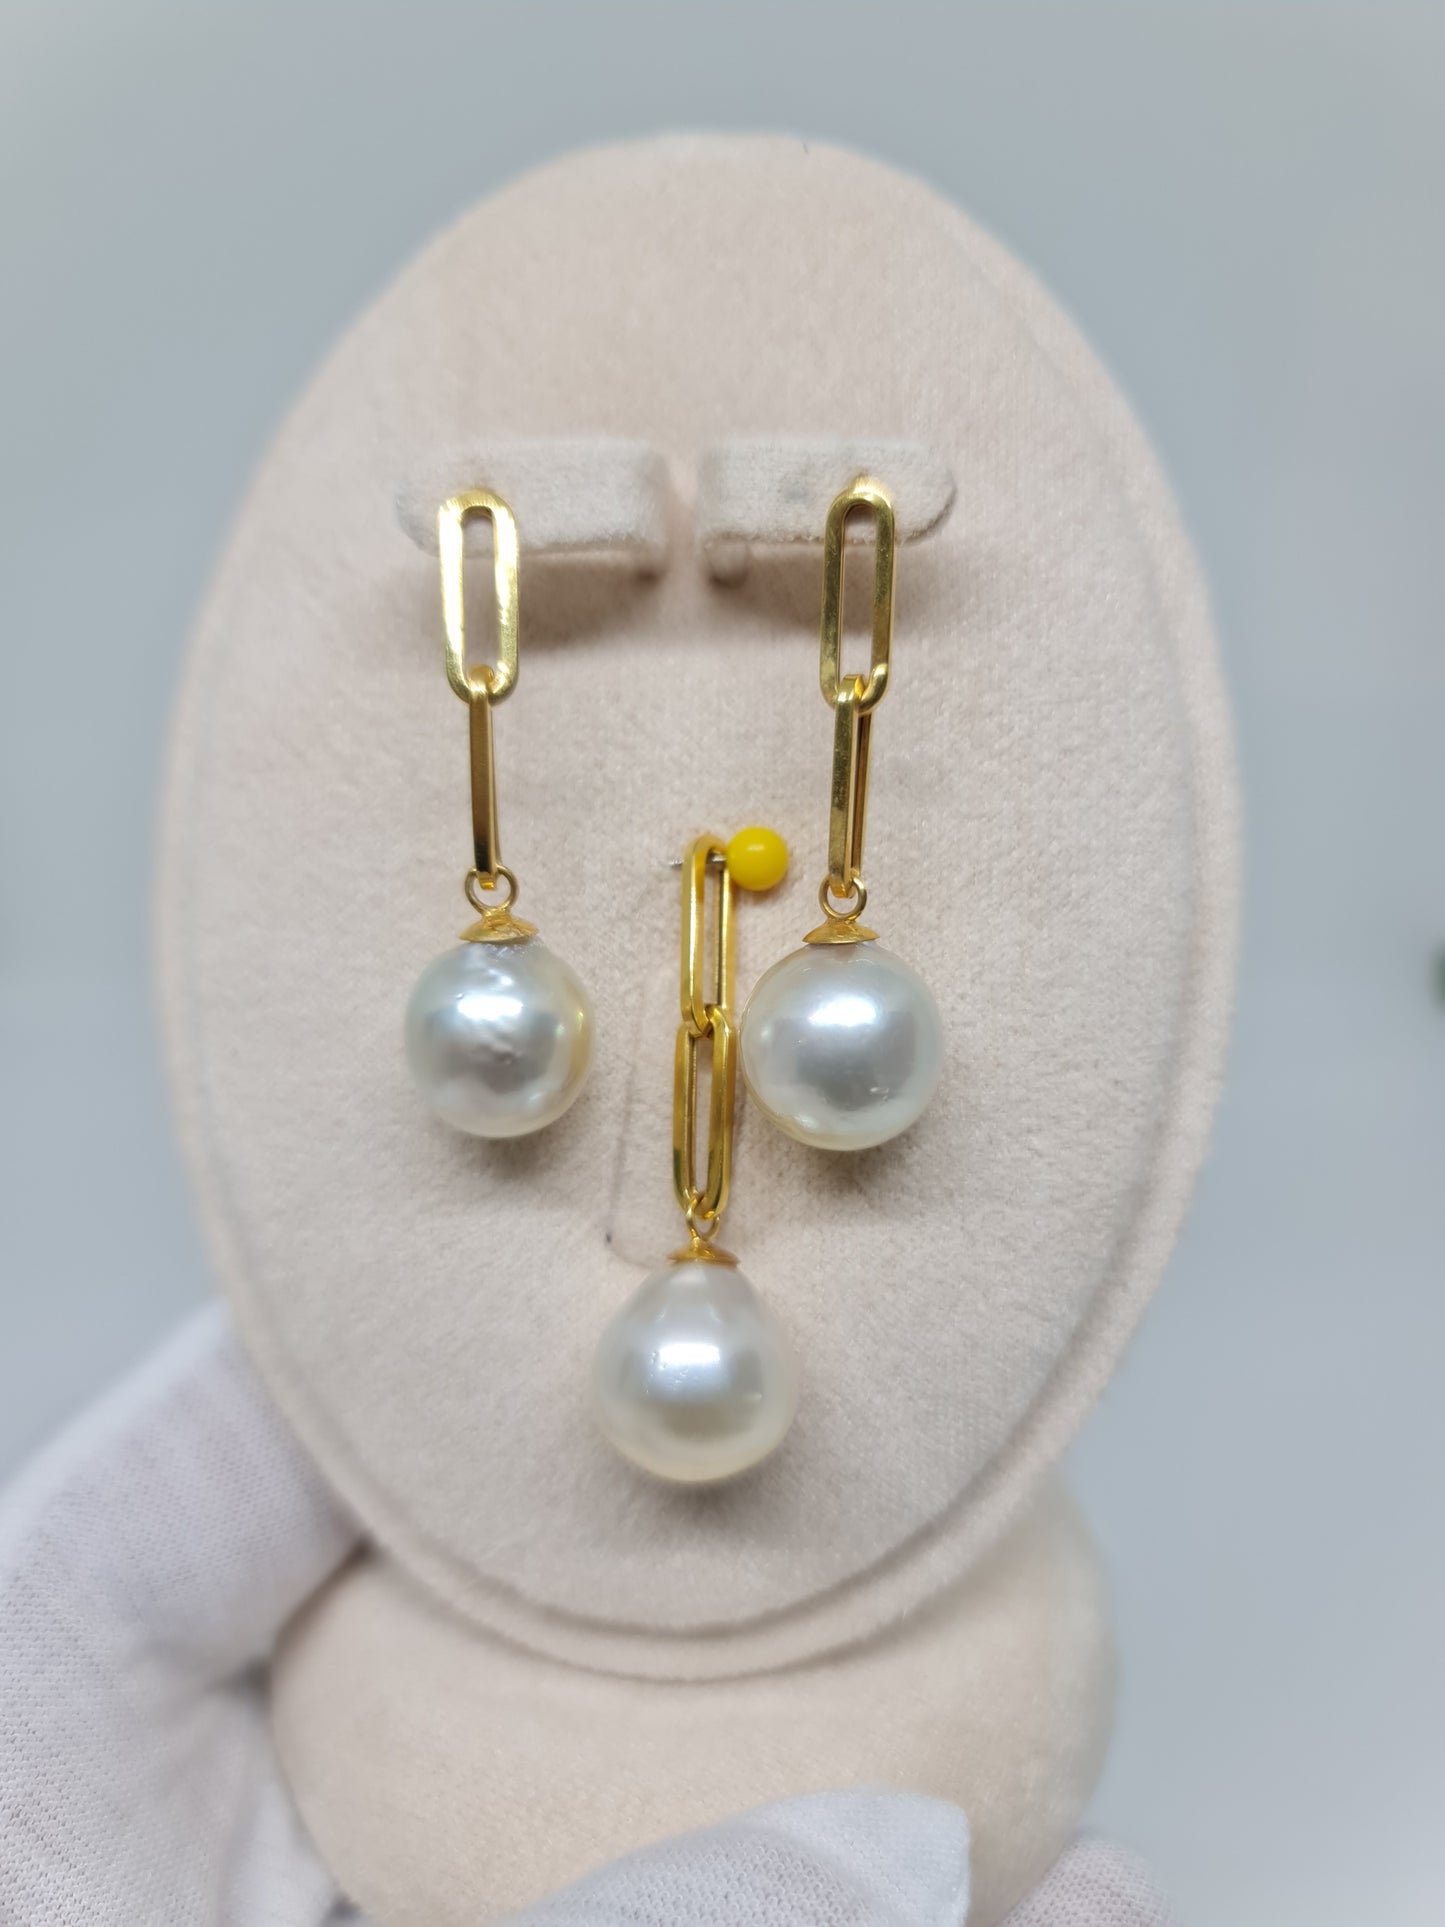 12.5mm to 13mm Classic White South Sea Pearls Set in 14K Gold